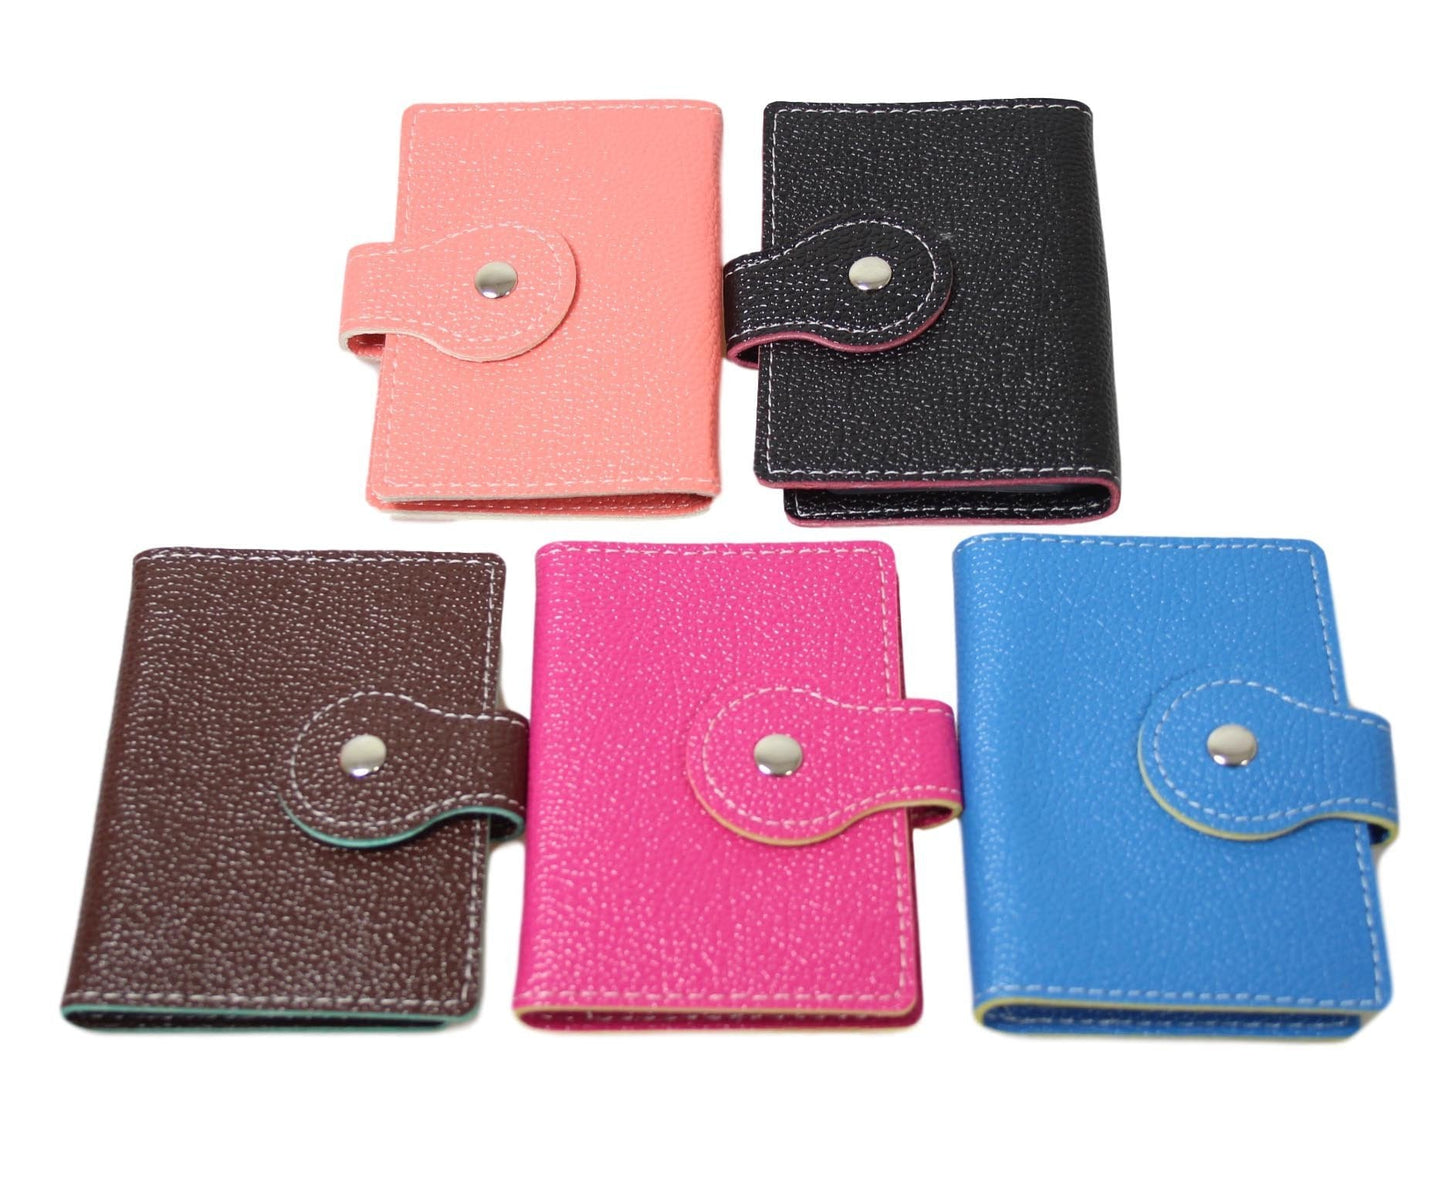 Assorted Colour Credit Card Pouch Pocket Size Unisex Holds 20 Cards 10cm x 8cm 5643 (Large Letter Rate)